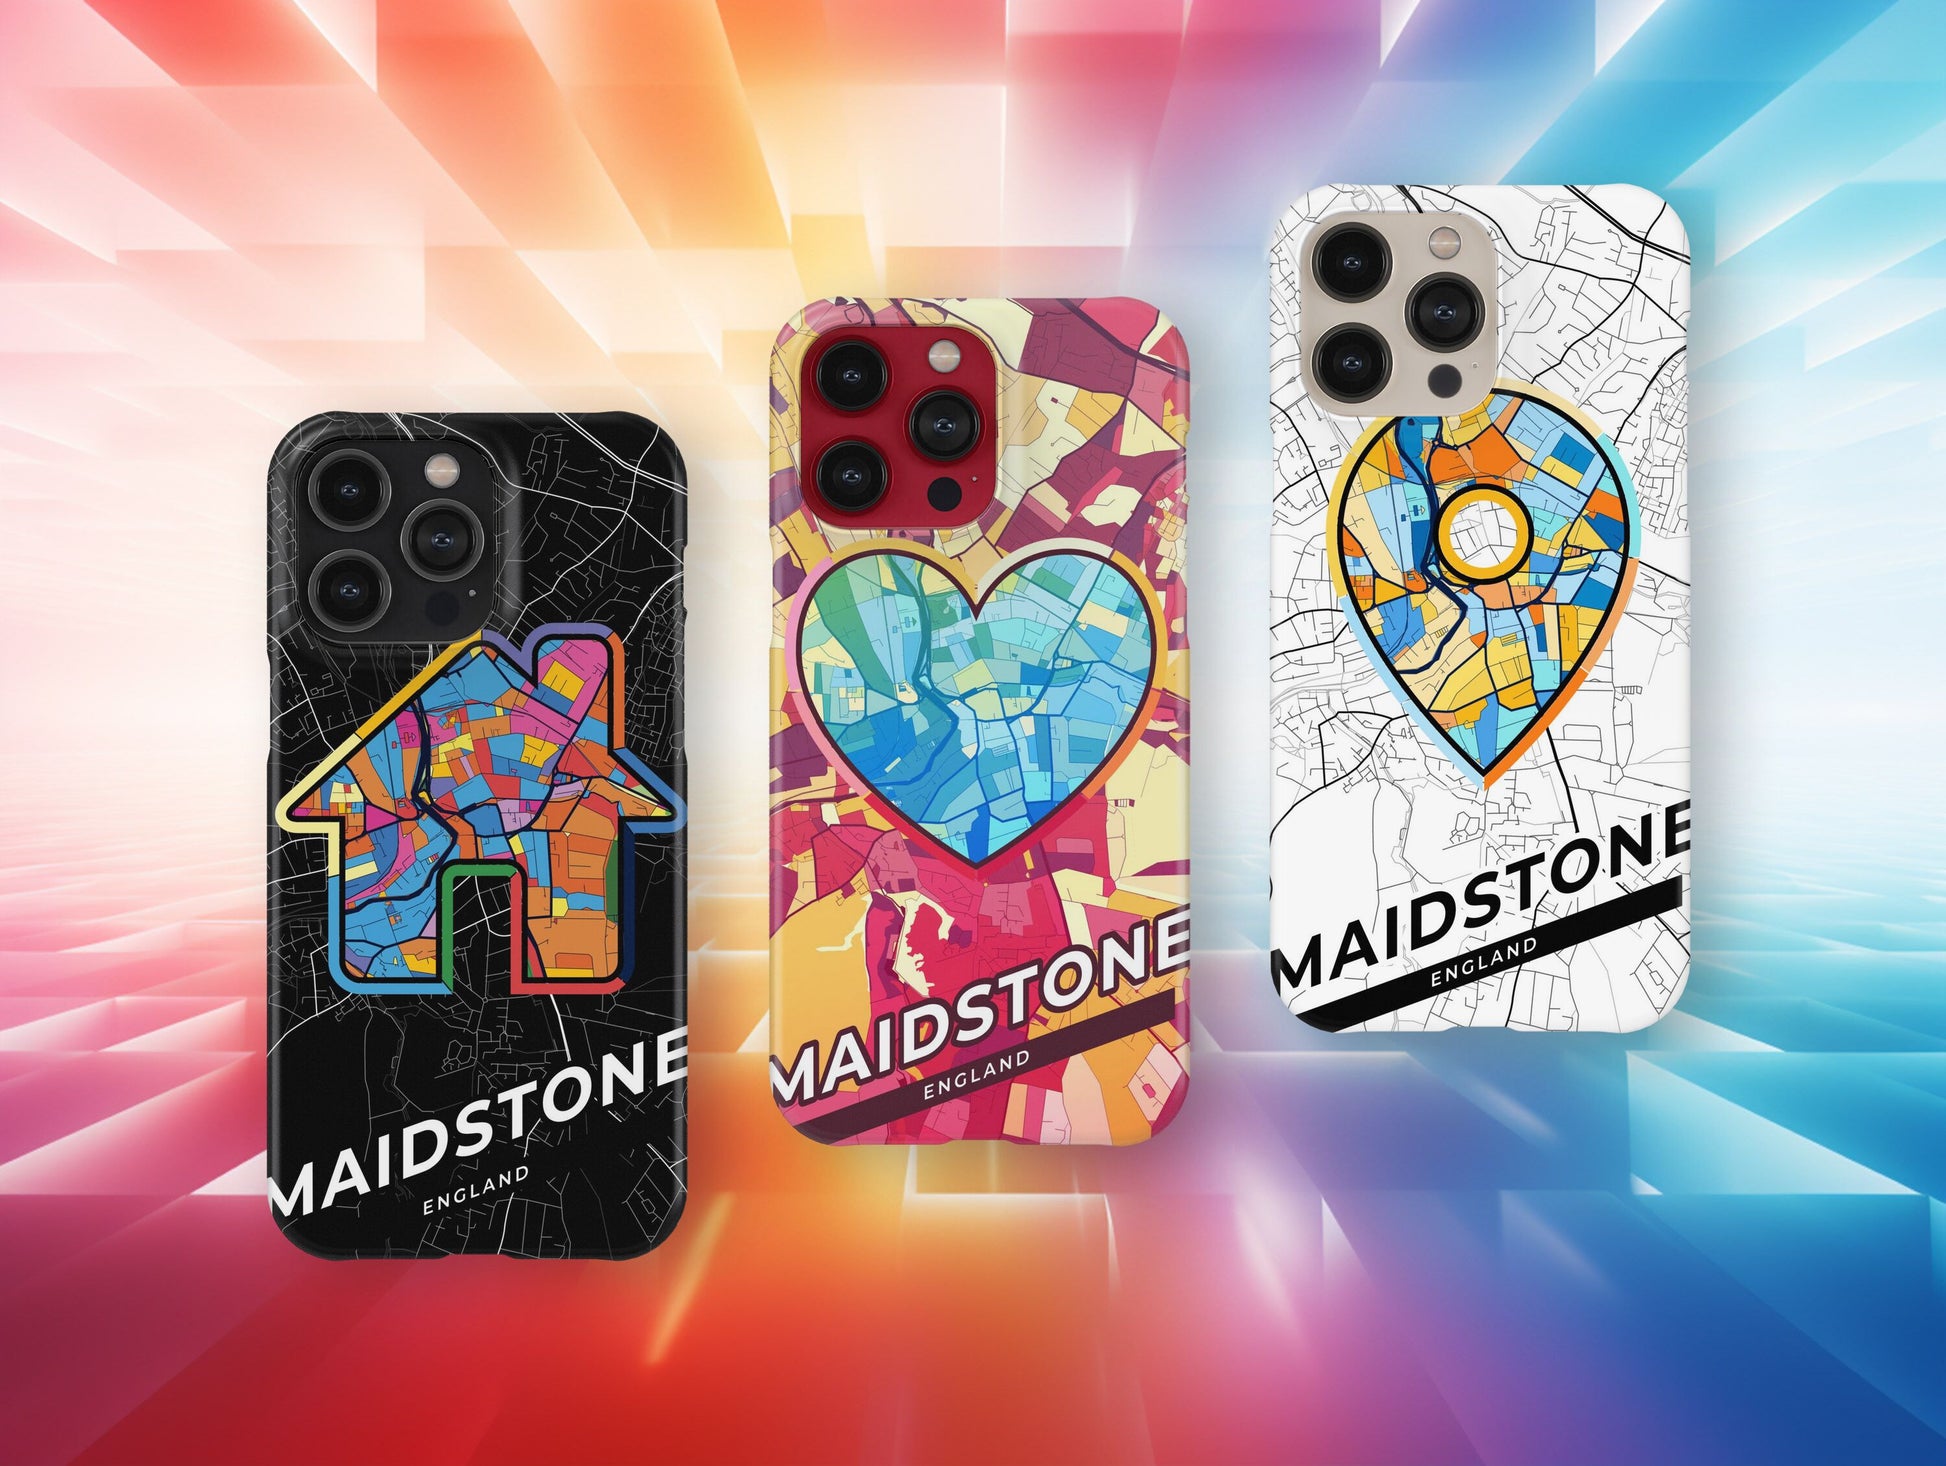 Maidstone England slim phone case with colorful icon. Birthday, wedding or housewarming gift. Couple match cases.